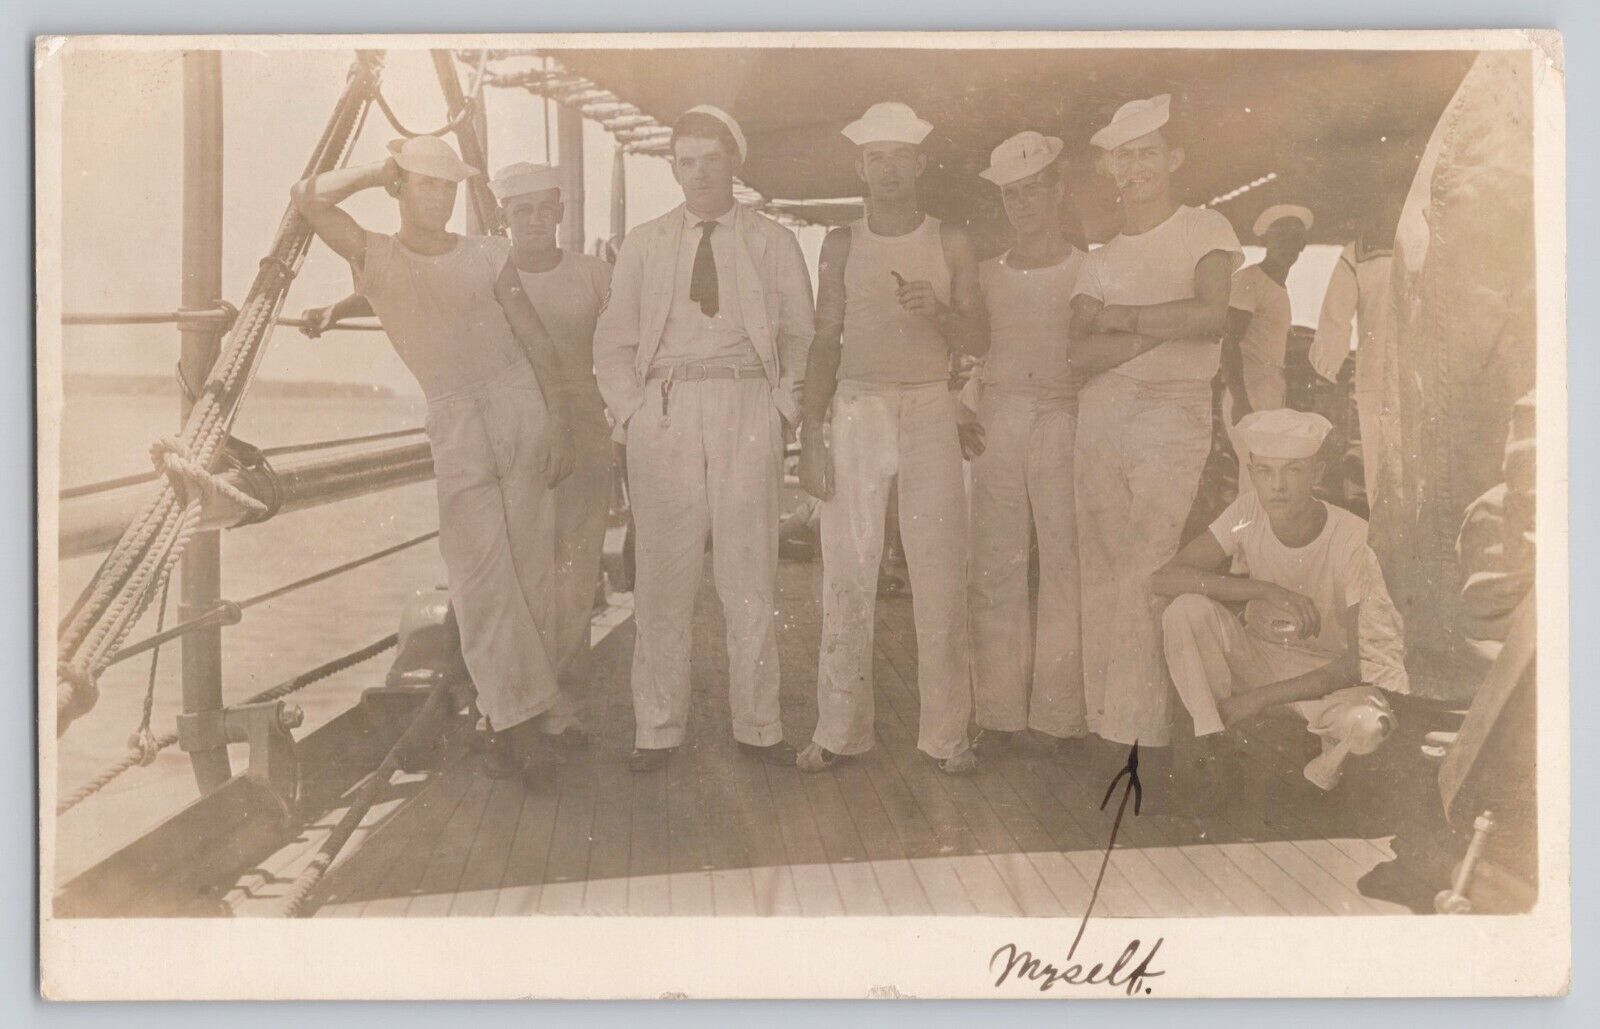 RPPC Postcard 8 Young Sailors On Deck Of WWI Era-Pre WWII Battleship or Cruiser